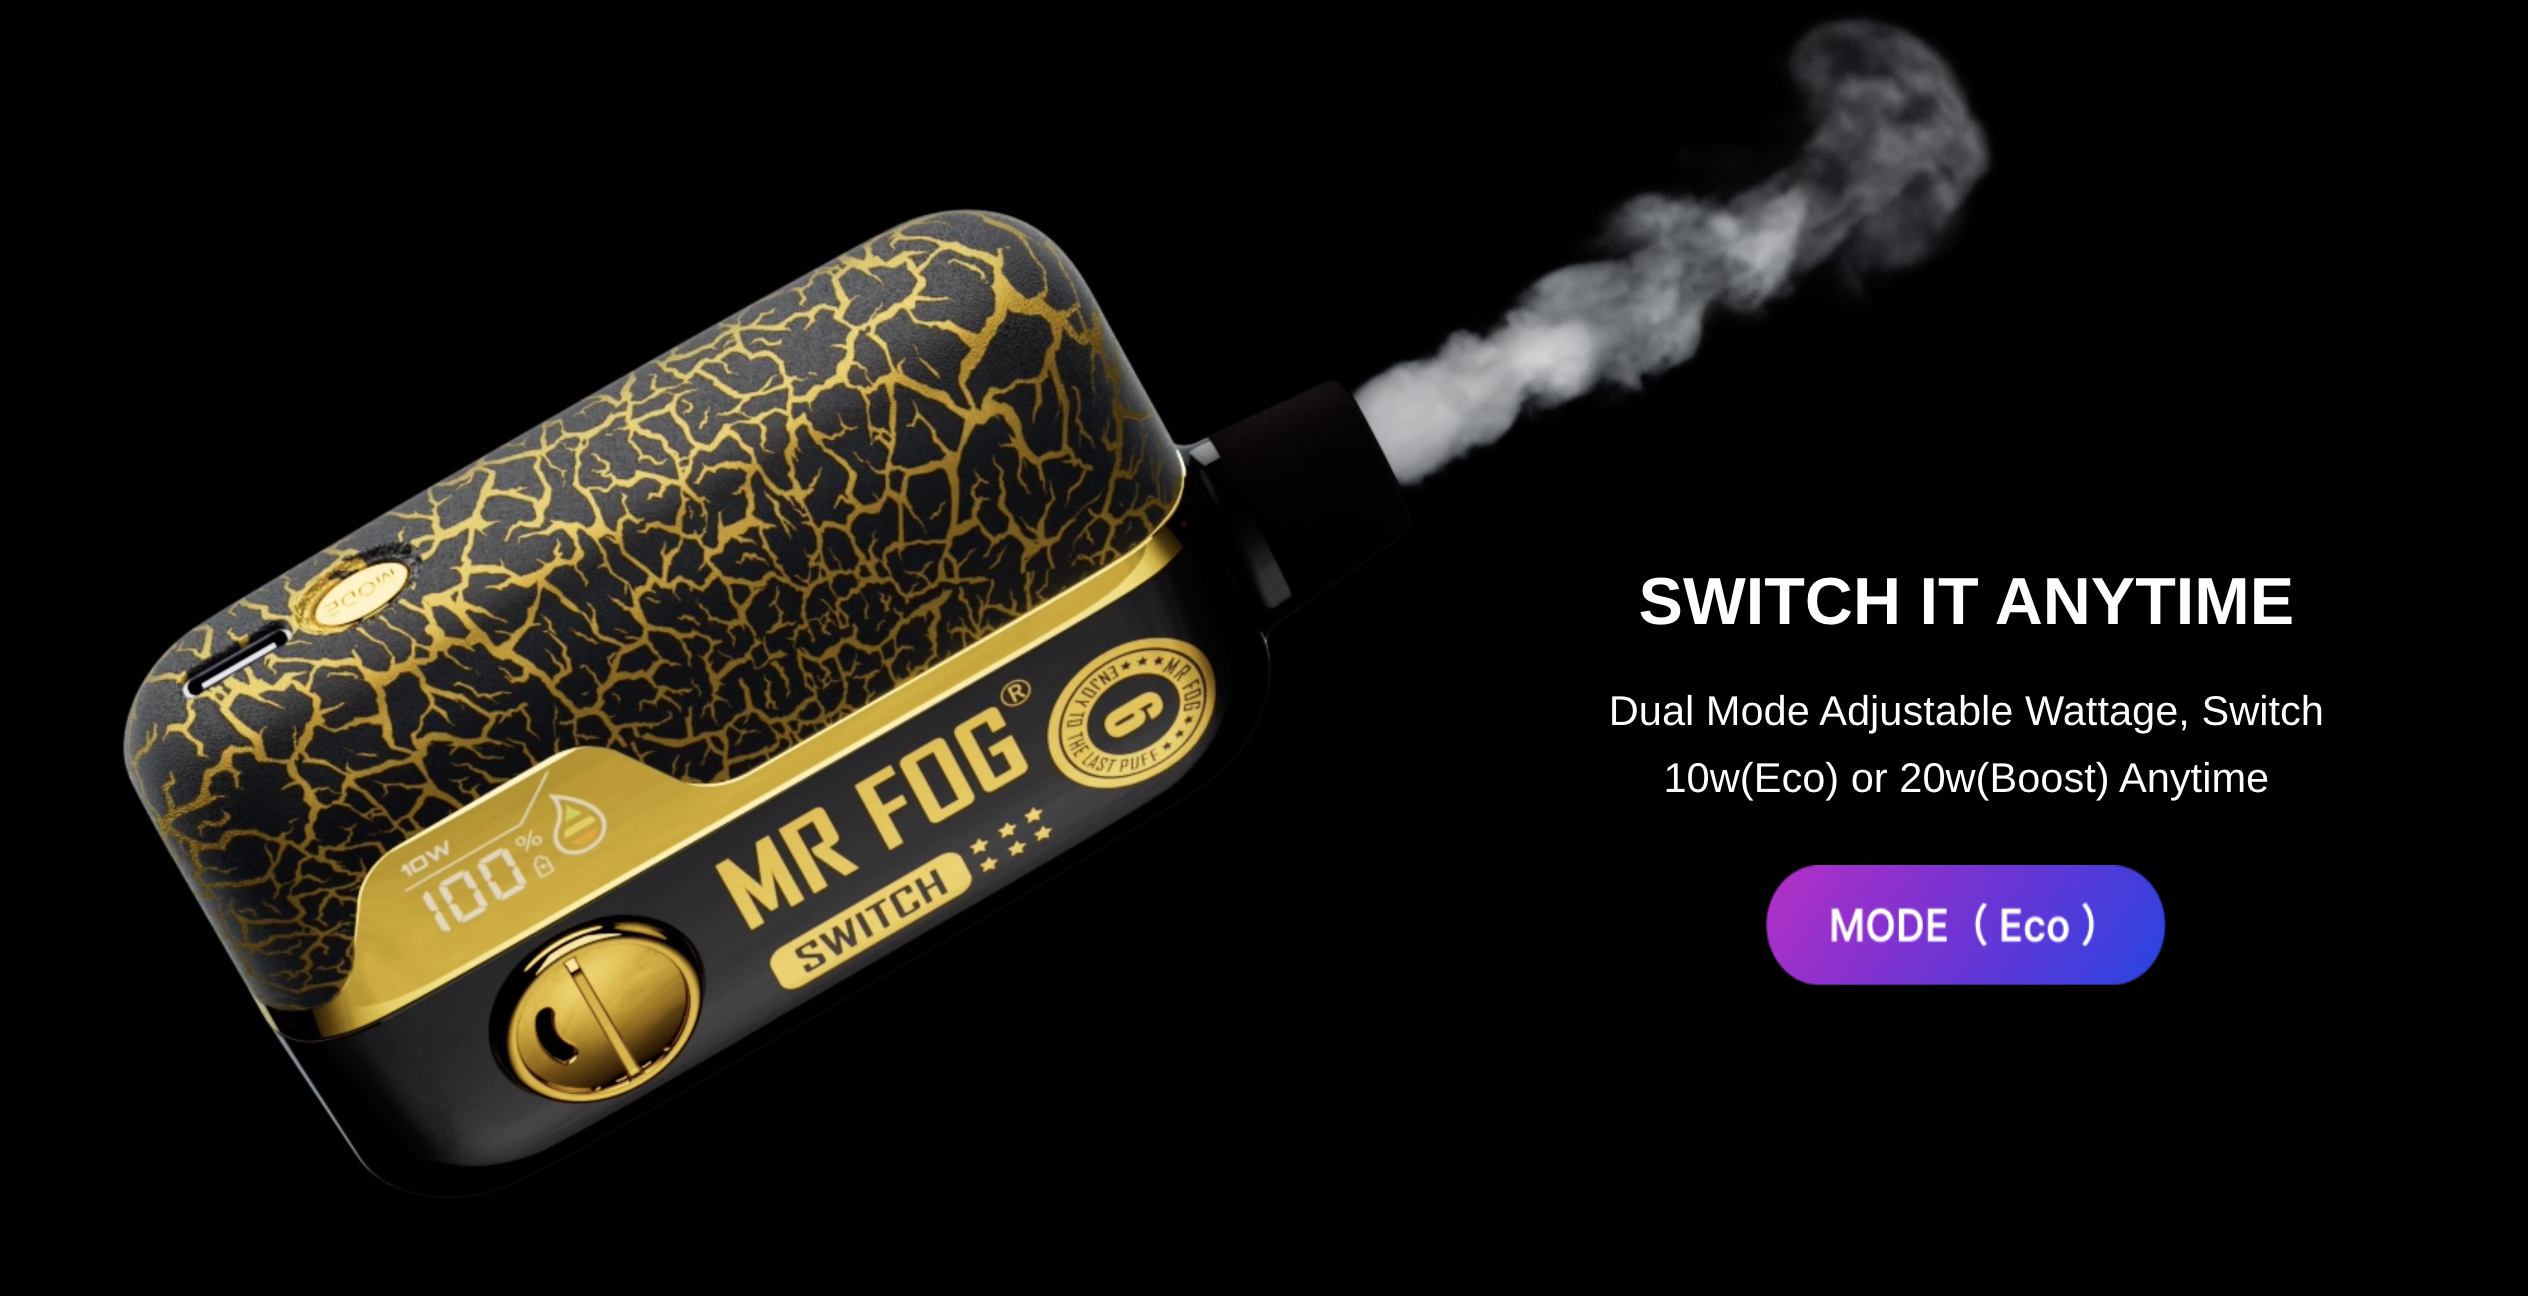 MrFog Switch Review 15K puffs